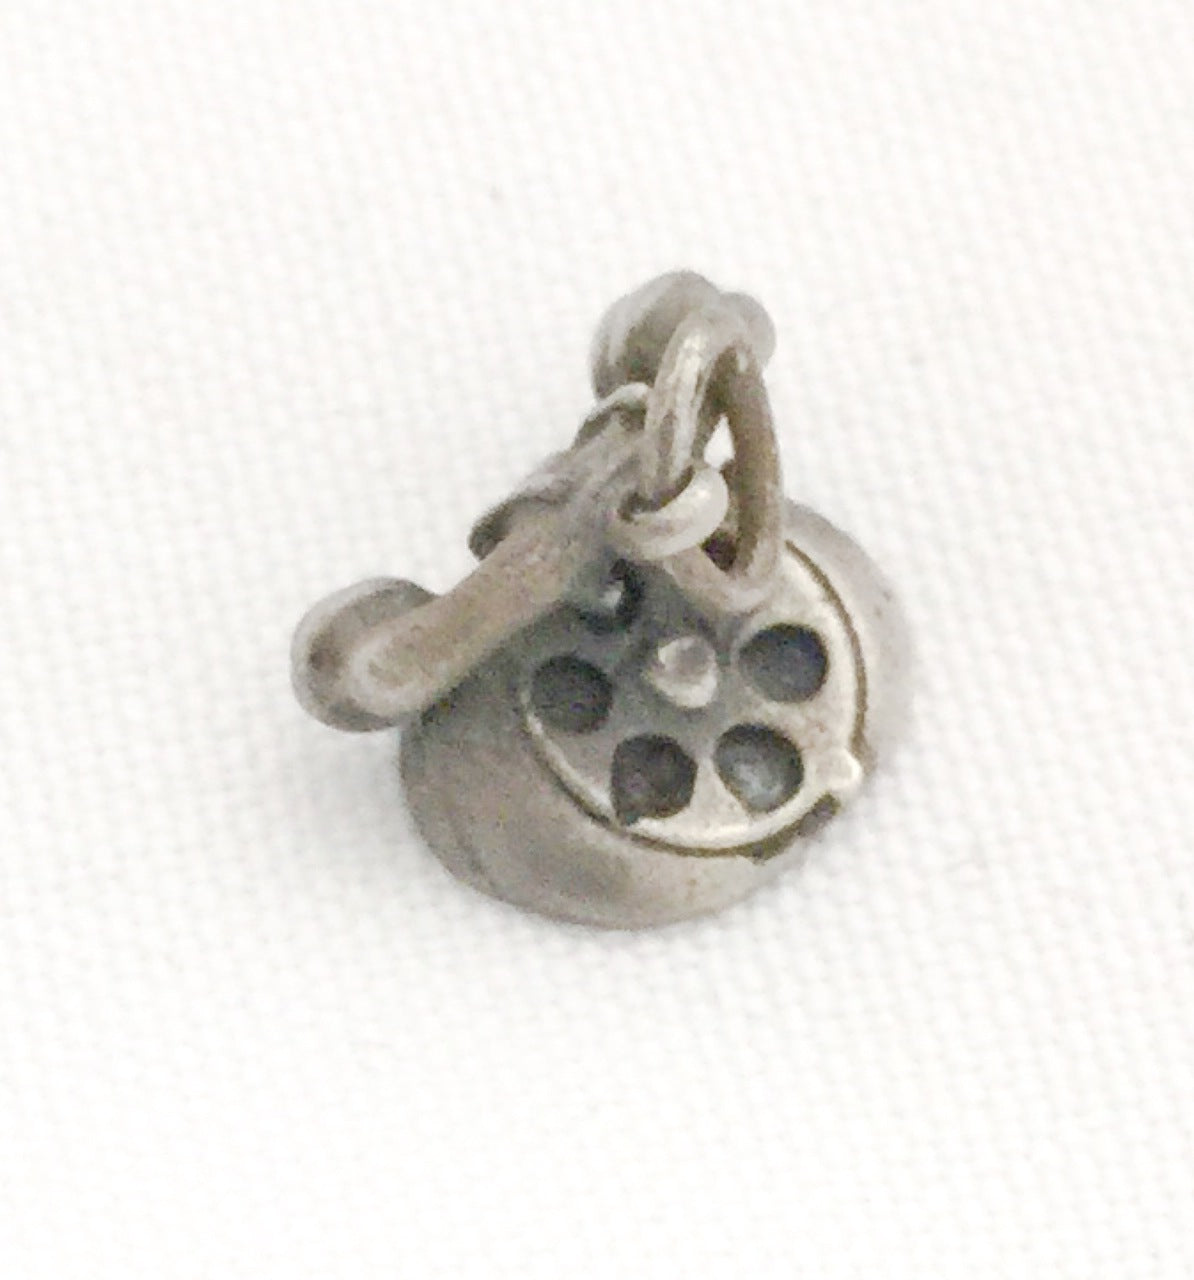 Telephone Charm Rotary Sterling Silver Small Vintage